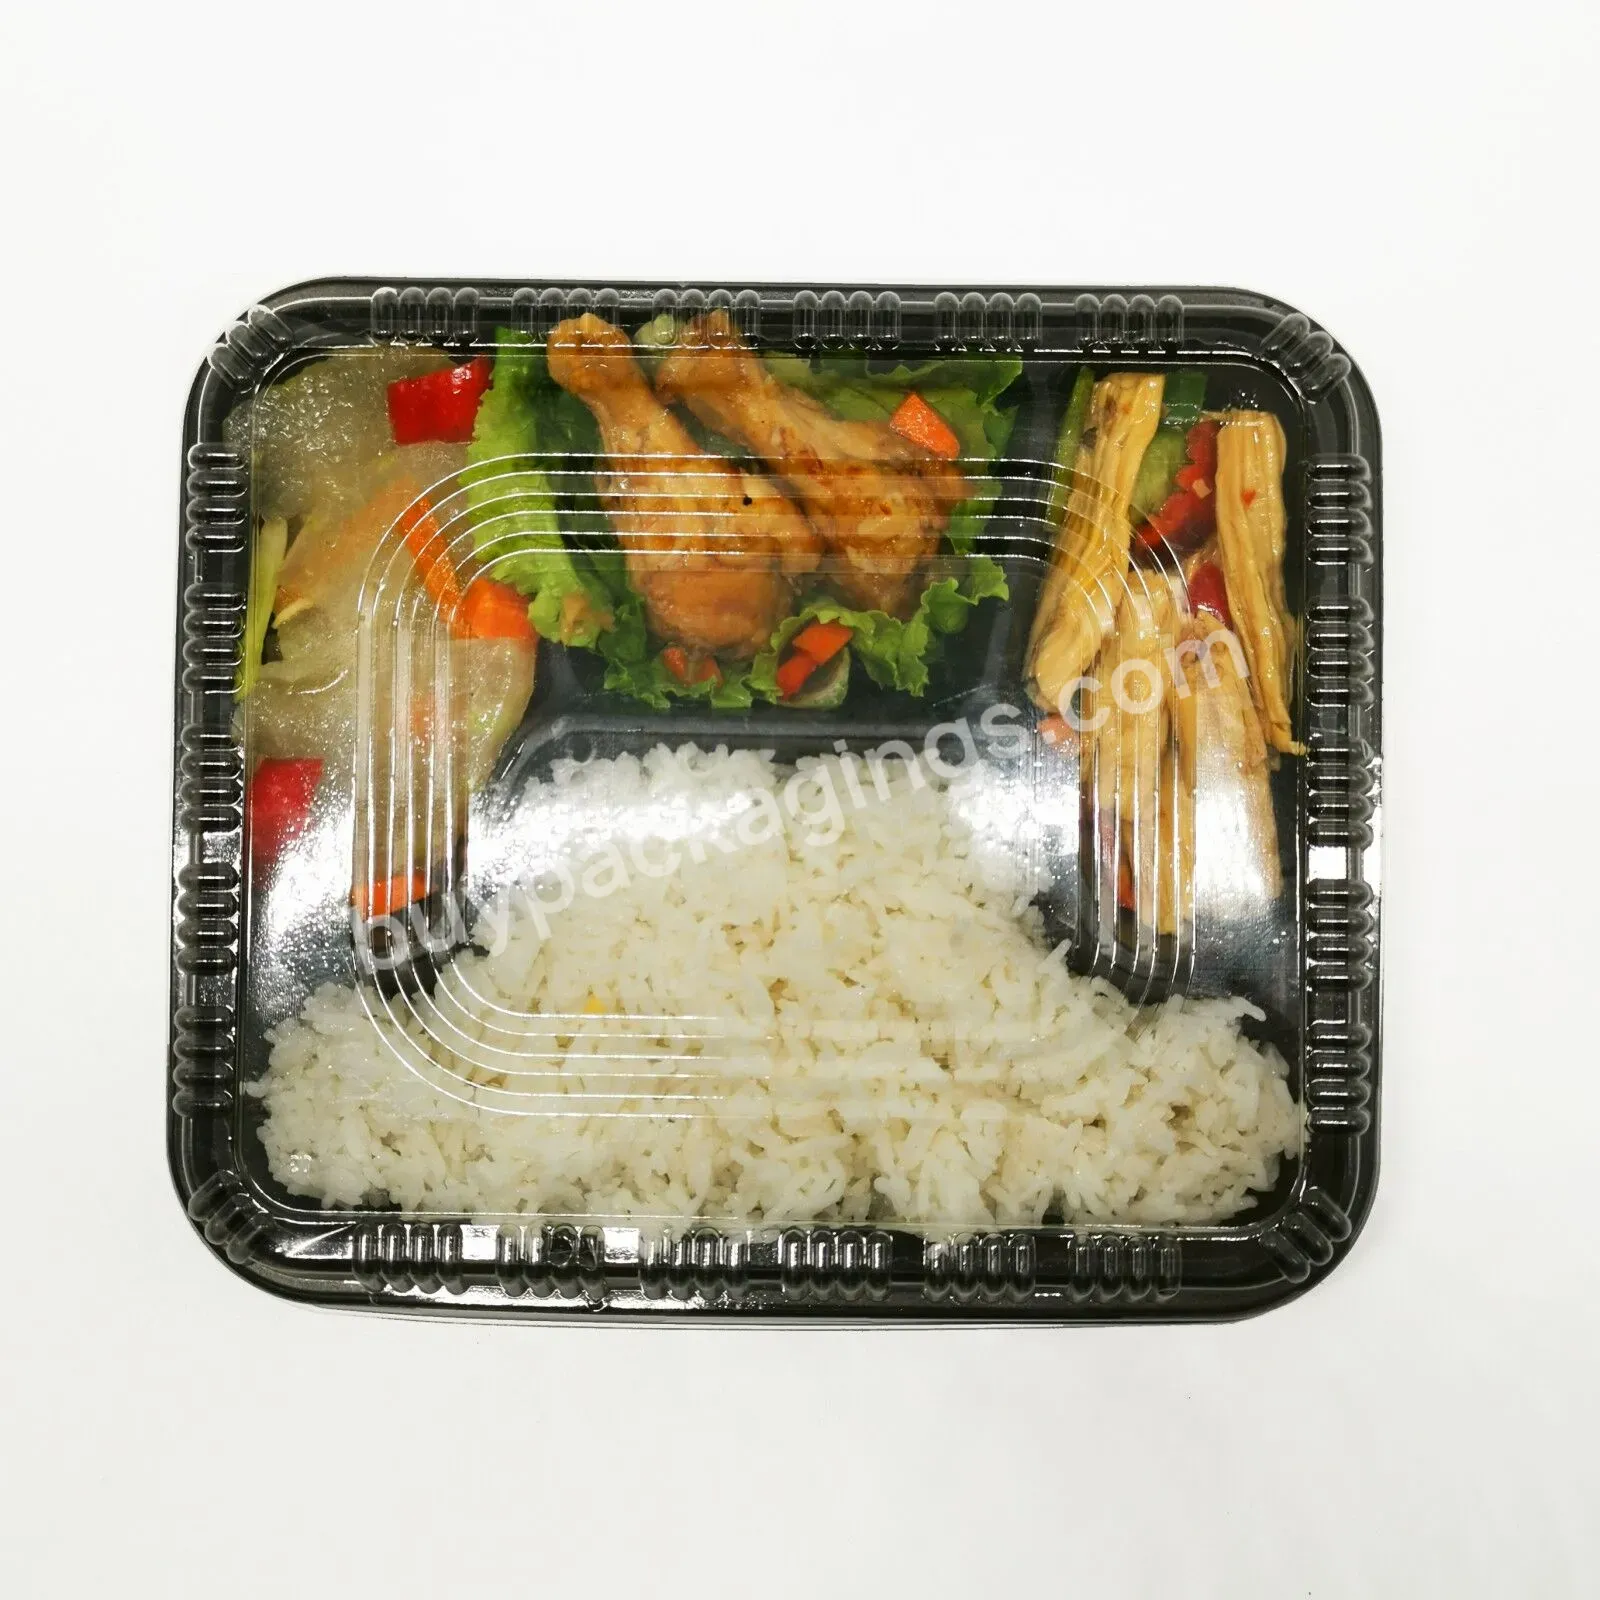 Microwave Safe Plastic 4 Compartments Meal Prep Container Bento Lunch Box - Buy Lunch Box Microwave Safe,Bento Box 4 Compartment,4 Compartment Food Container.